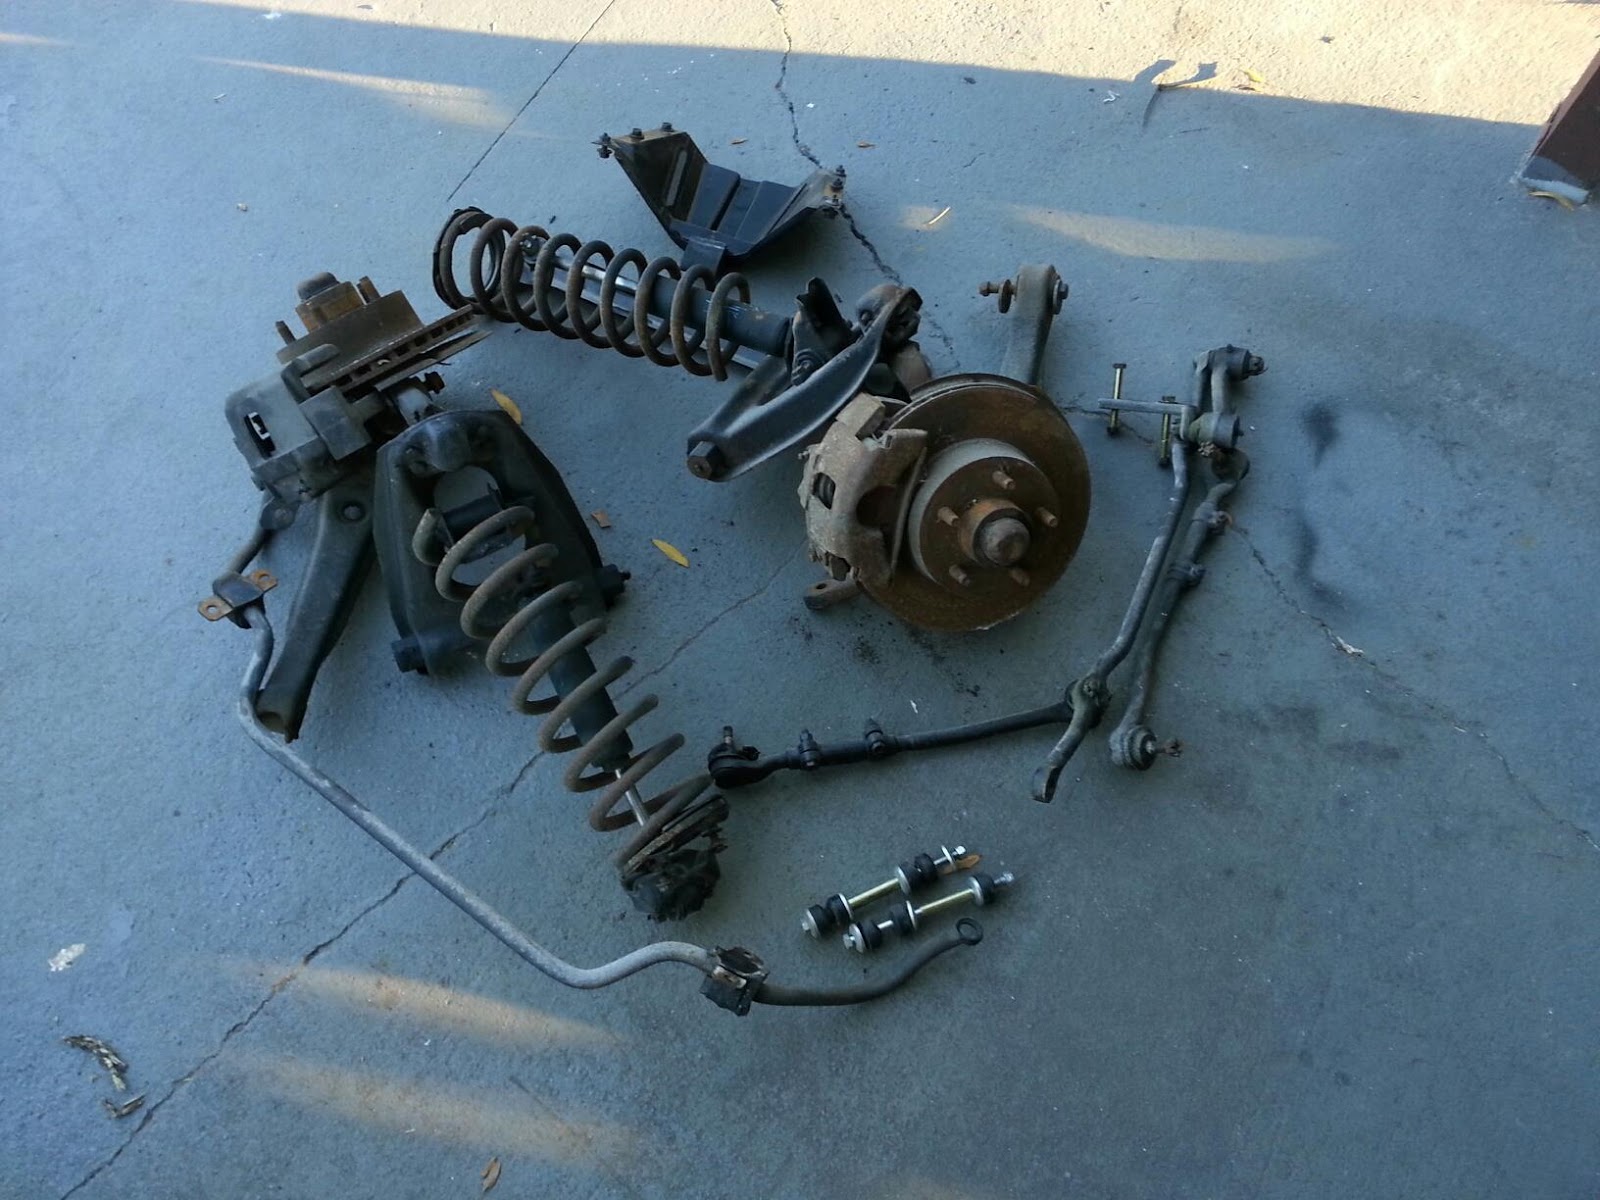 CSC Motors: Our 1968 mustang gets a new front suspension